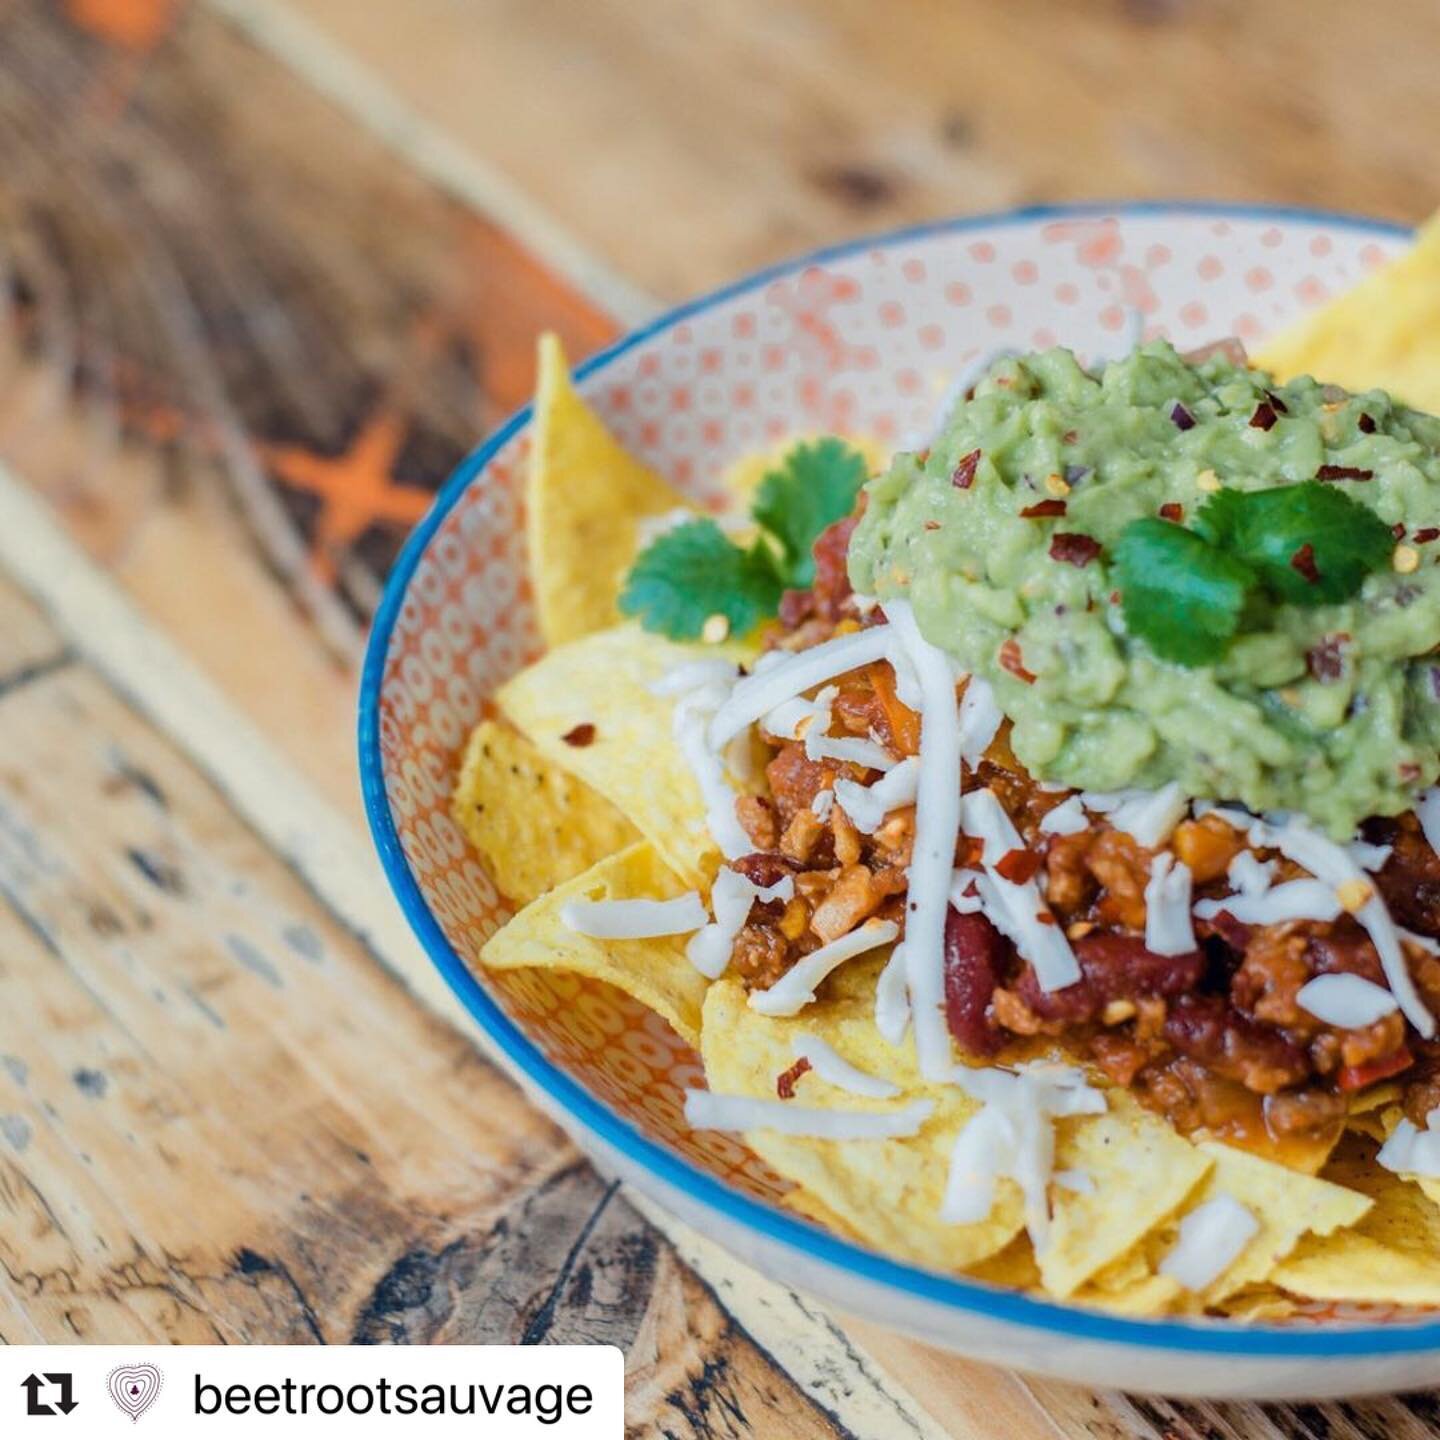 🧀Quick melt tip: our cheese can be grated on tortilla chips and melts in only 1 min 30 seconds in the microwave! 🤯
.
#Repost @beetrootsauvage 
・・・
🍲 Nachos! We&rsquo;re so pleased to have added them to our new menu, as we&rsquo;re only getting goo